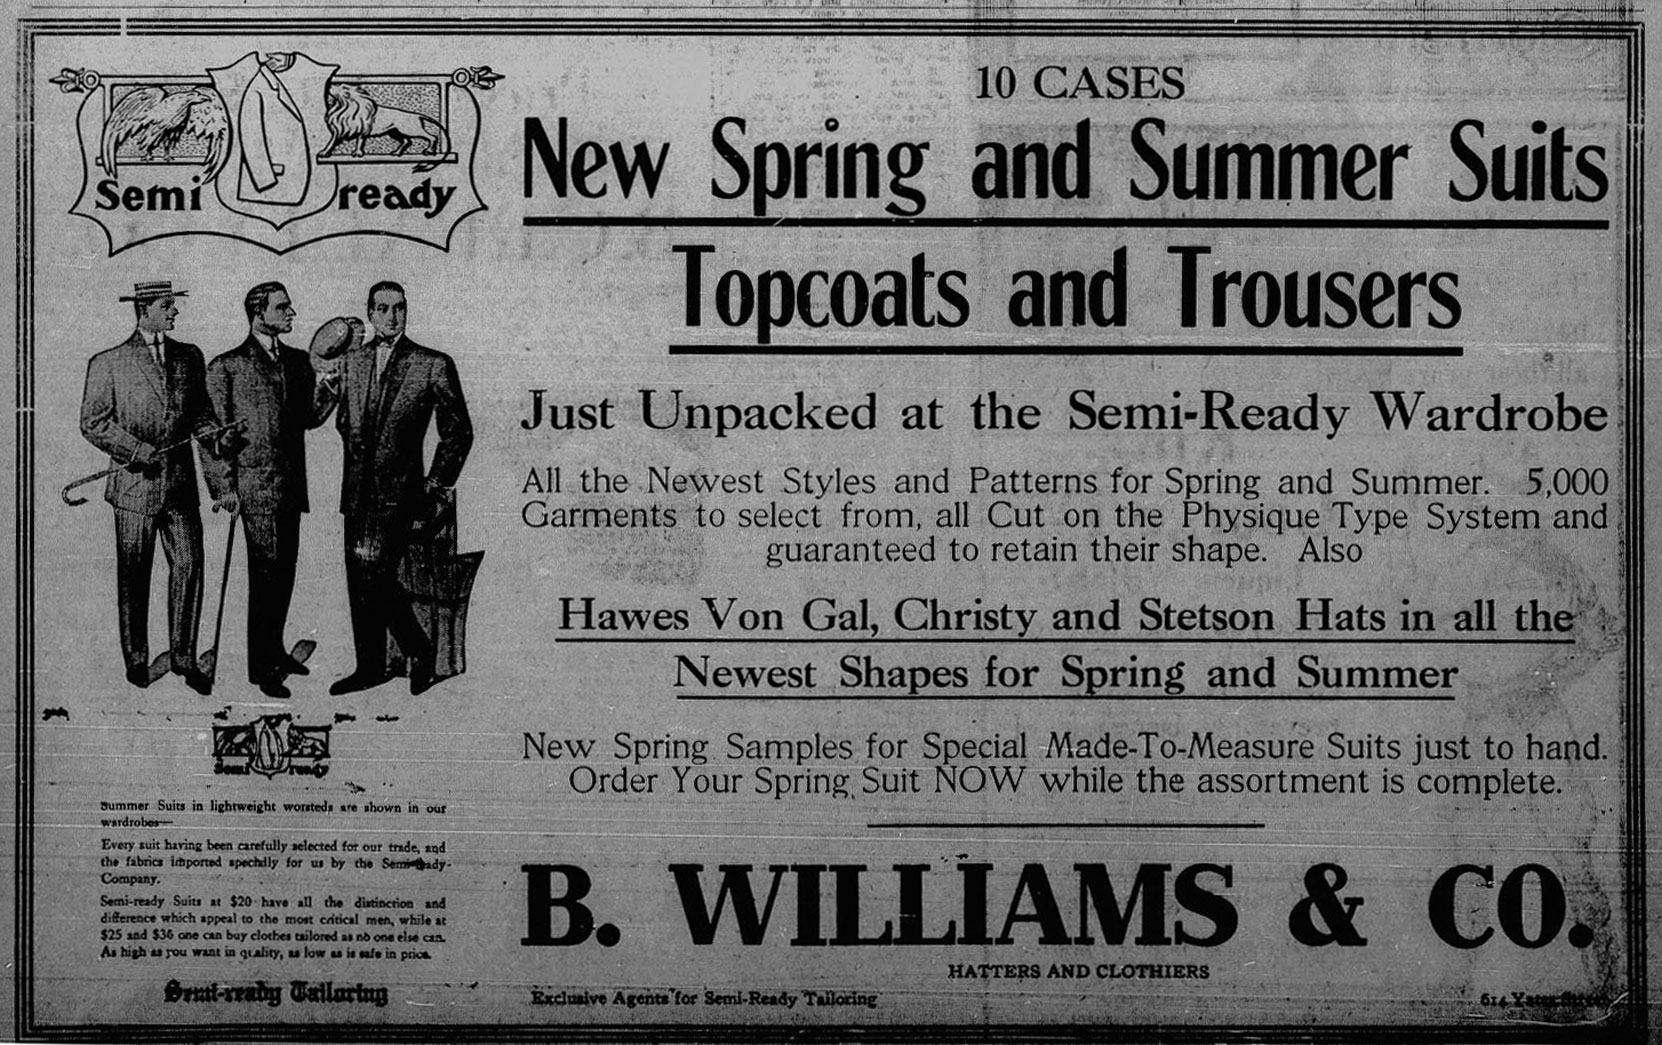 1911 advertisement for B. Williams & Co., Clothiers & Hatters, 614 Yates Street (Victoria Online Sightseeing Tours collection)